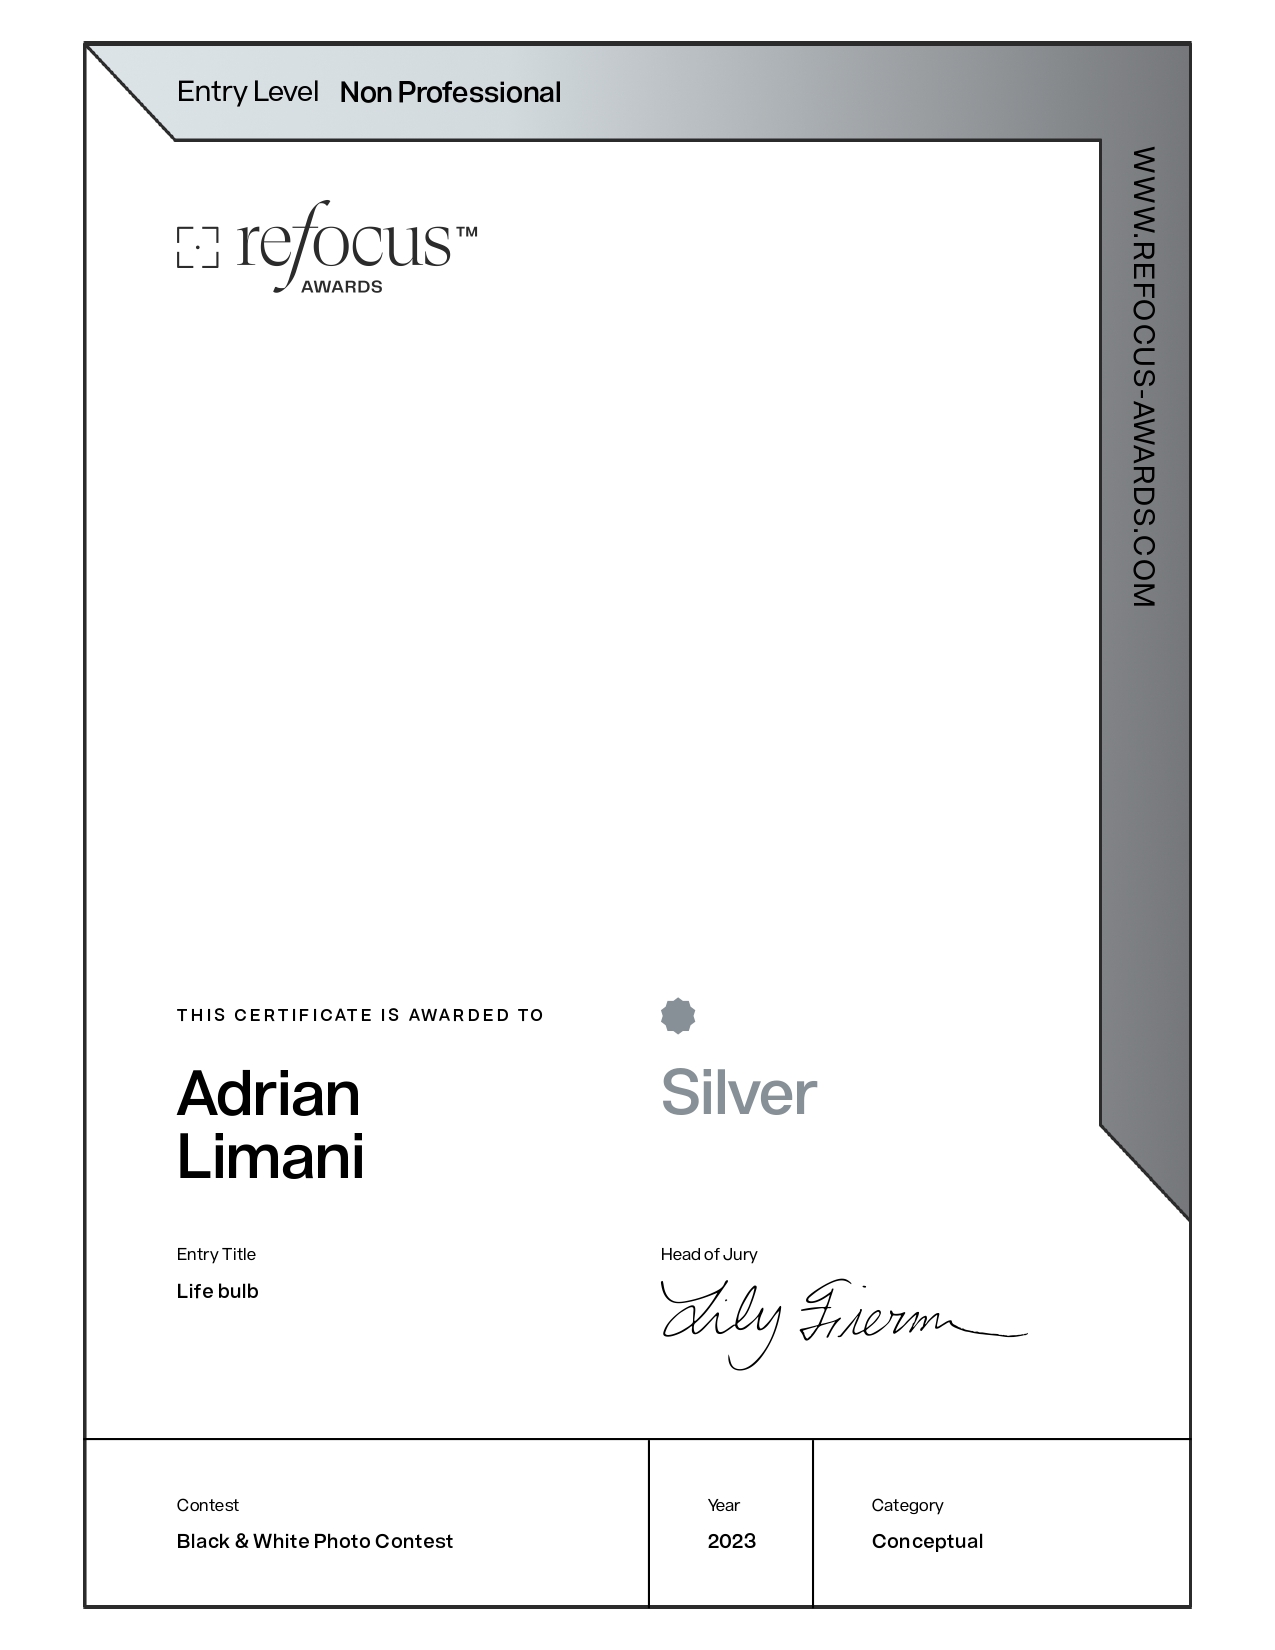 reFocus-Awards-Certificate silver_page-0001